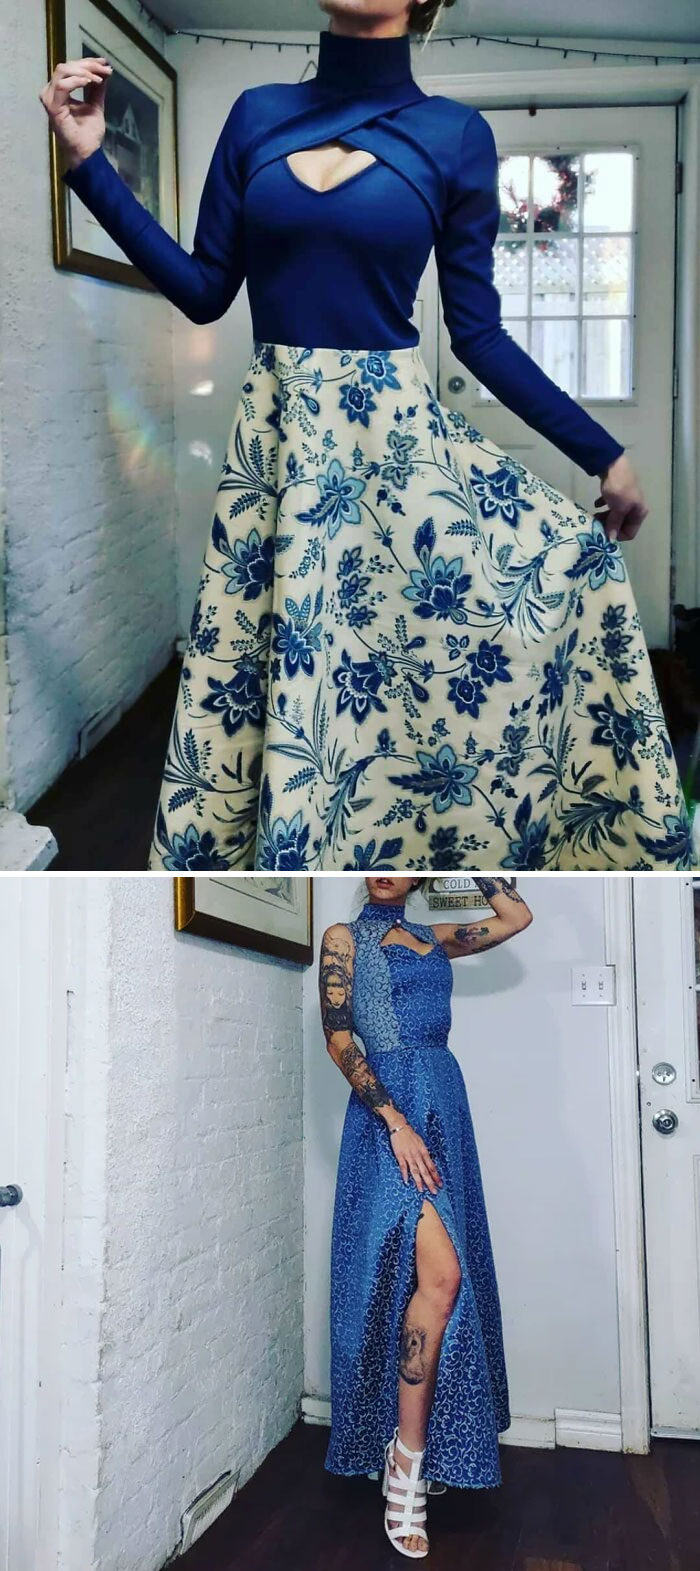 I Made These Two Dresses This Week. The Fabric Is Thrifted And The Long All Blue Dress Used To Be A Curtain